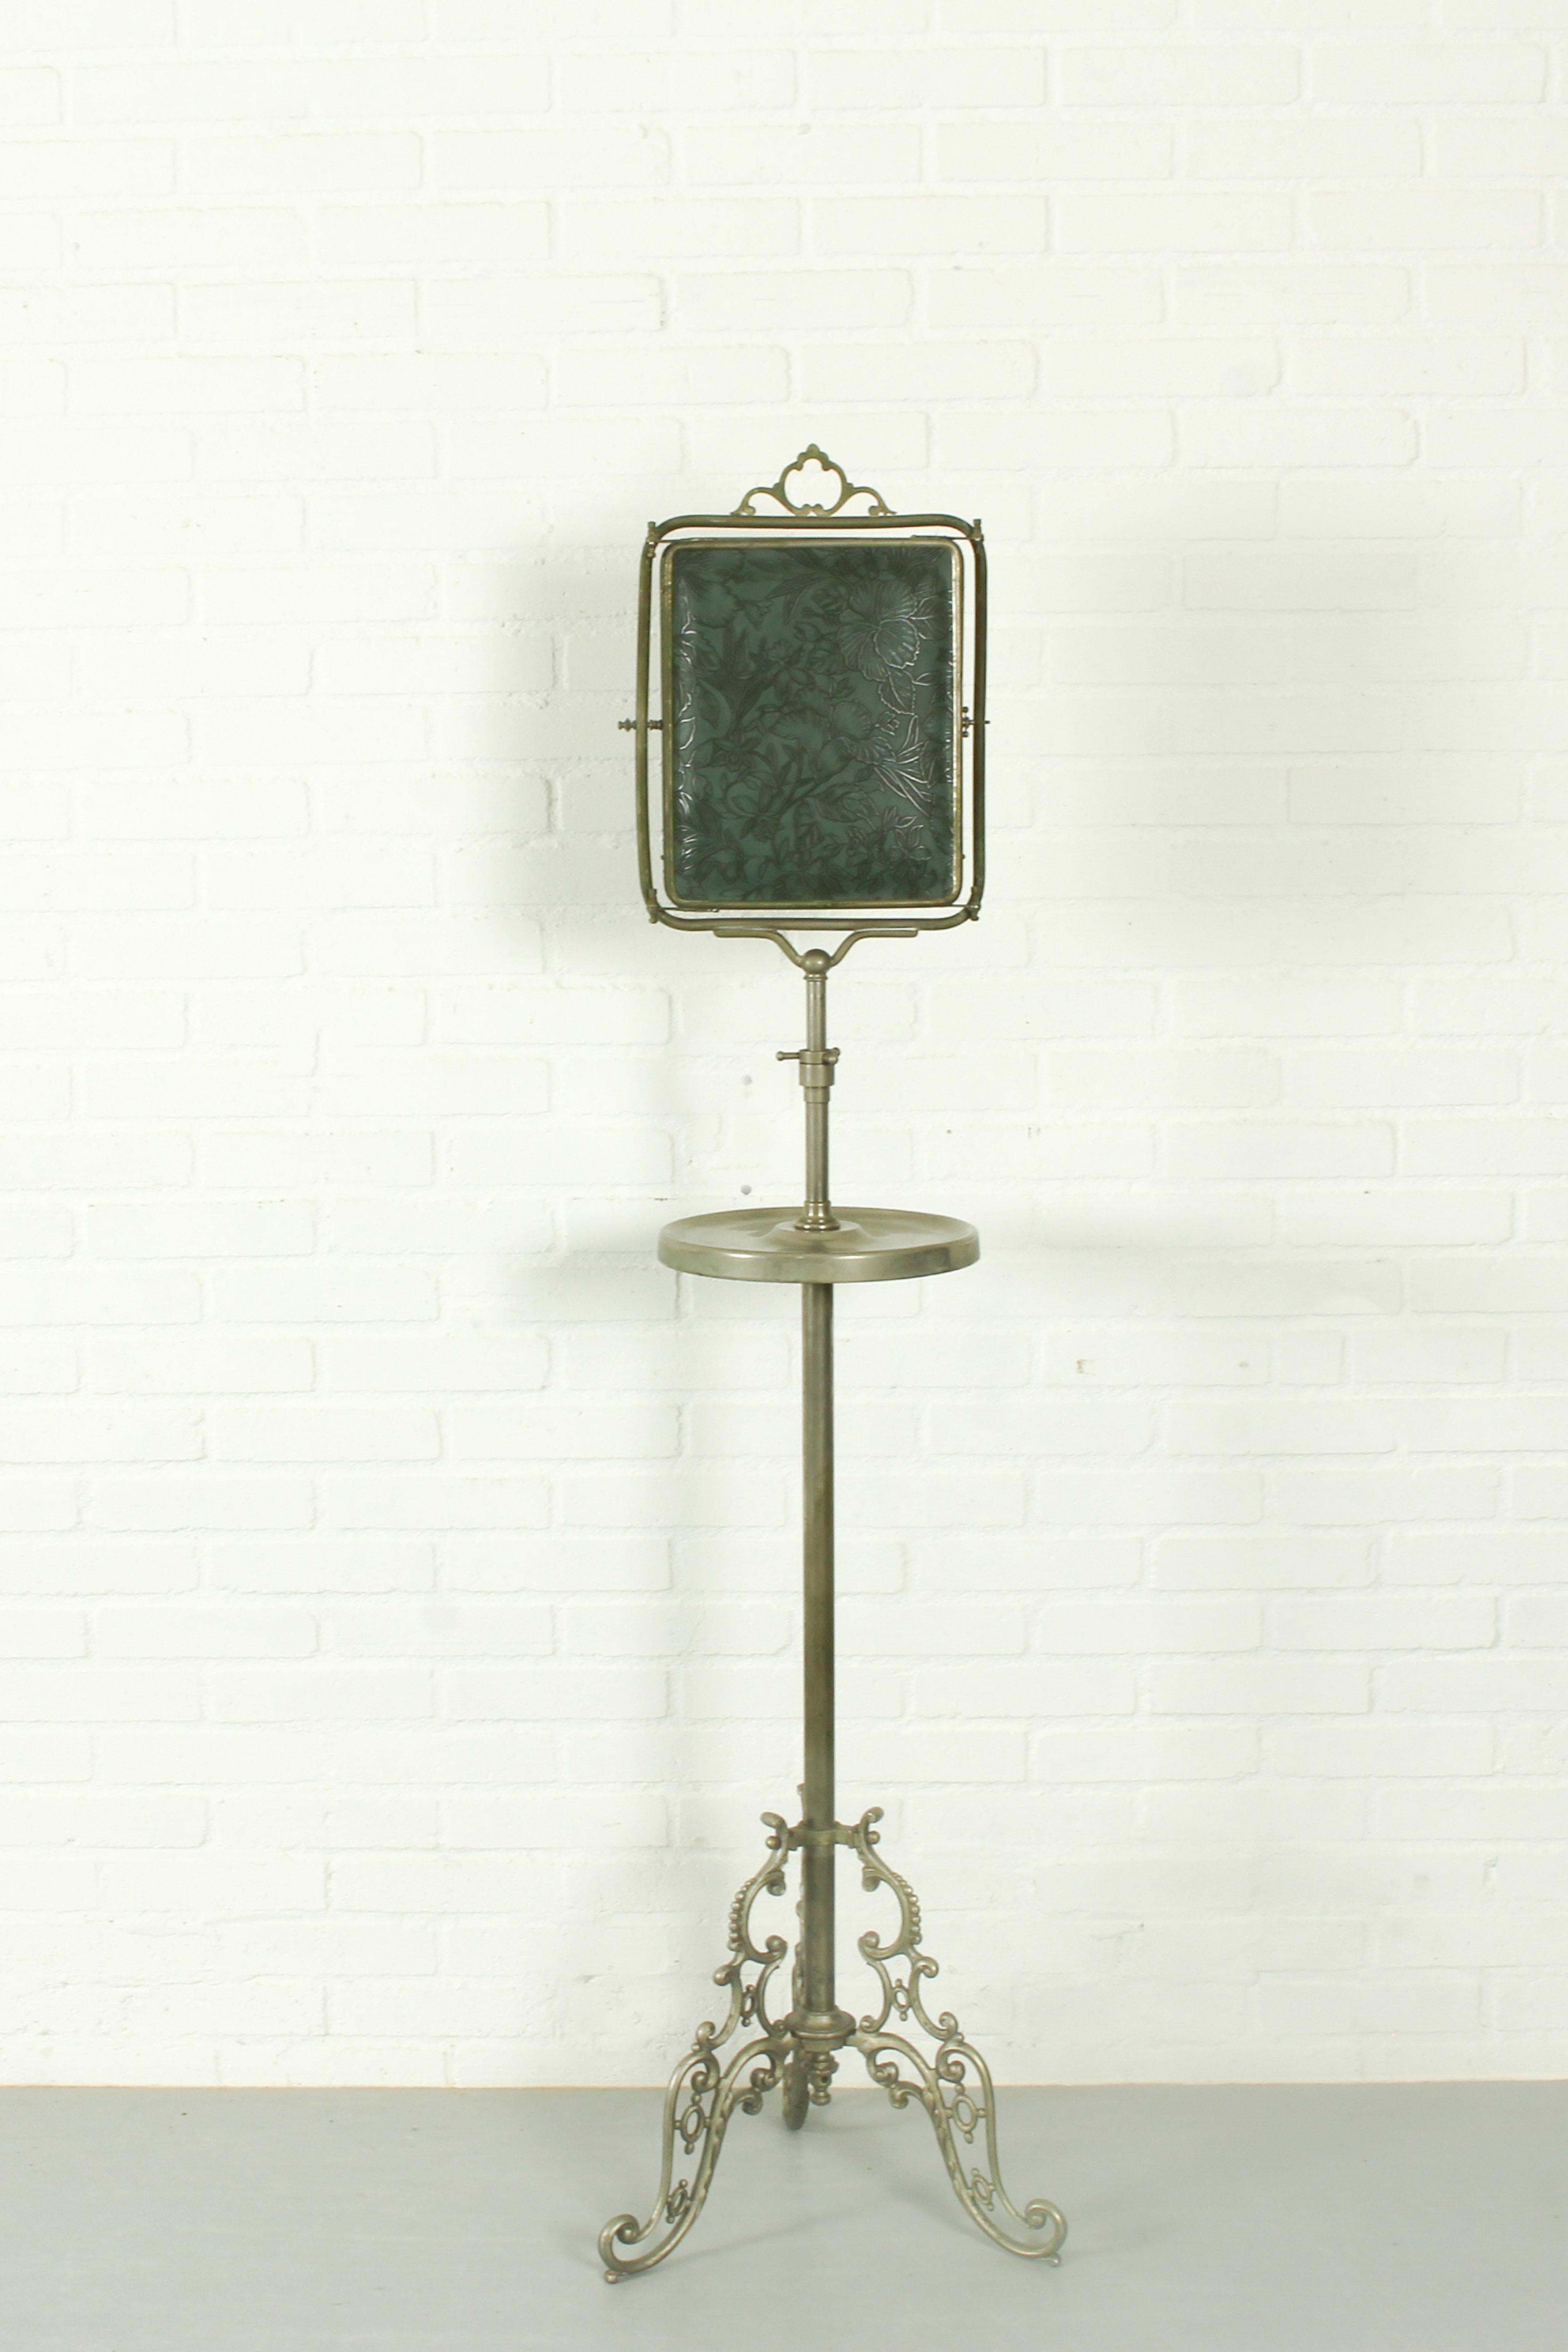 Fantastic and rare shaving mirror on a metal stand. The mirror has three panels, the central one can be adjusted and tilted. See images for embossed leather decorations. 

Dimensions: 150/120cm h, 42cm w.
